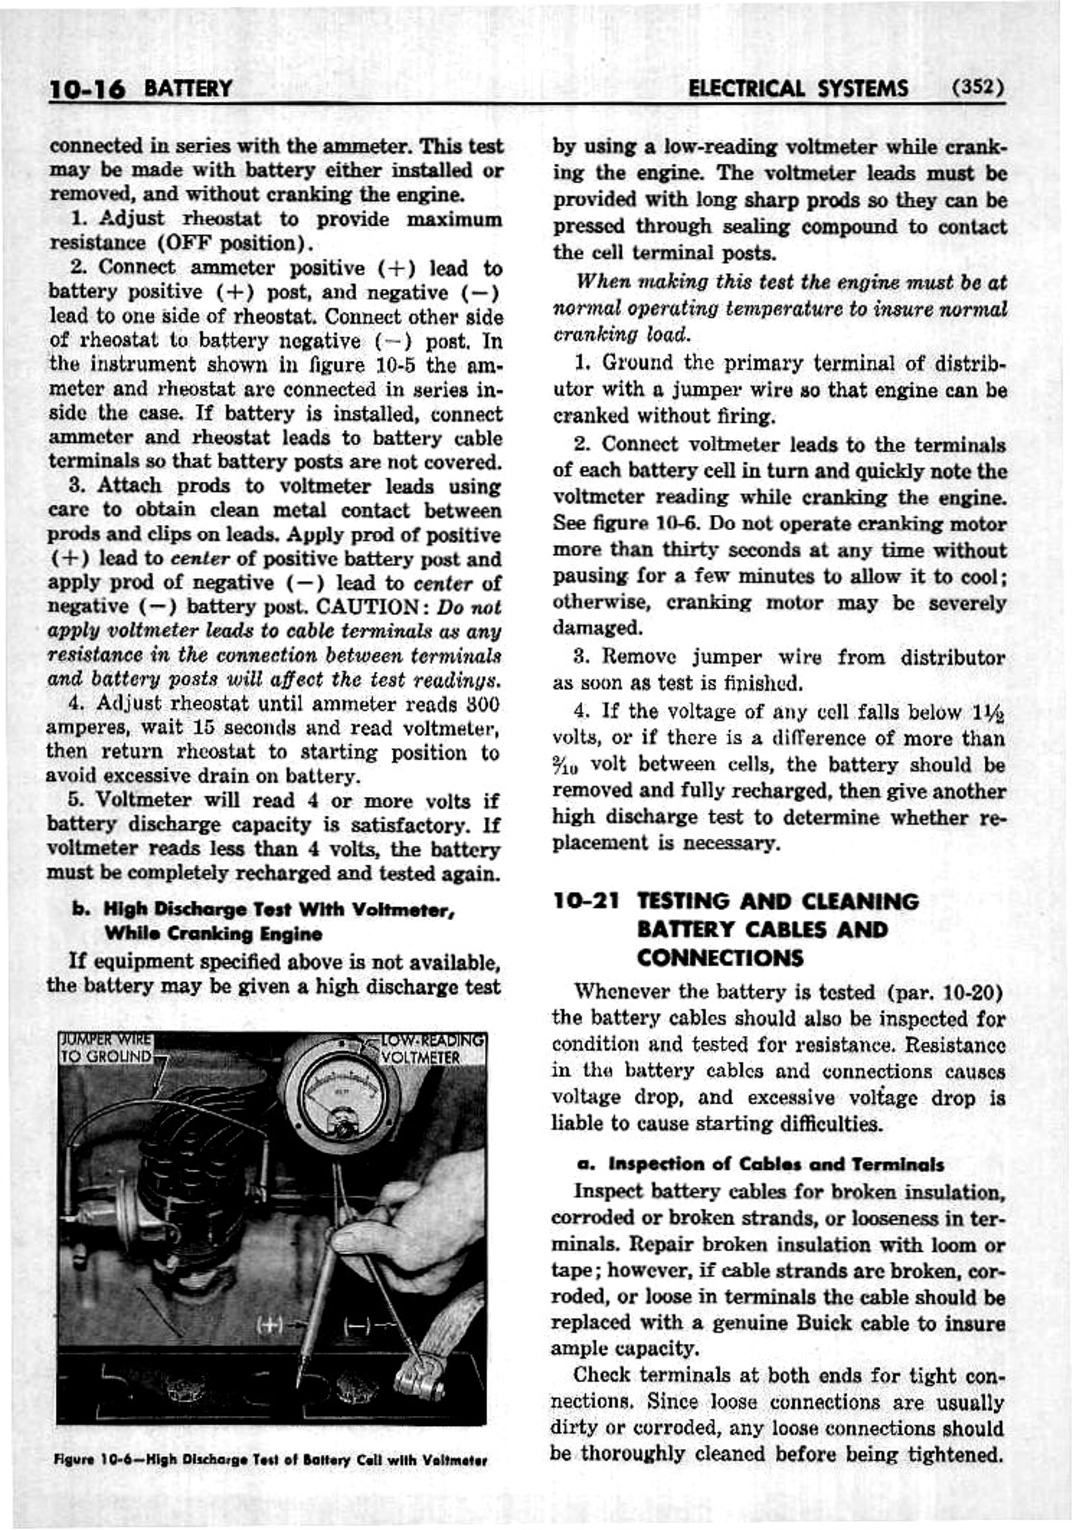 n_11 1952 Buick Shop Manual - Electrical Systems-016-016.jpg